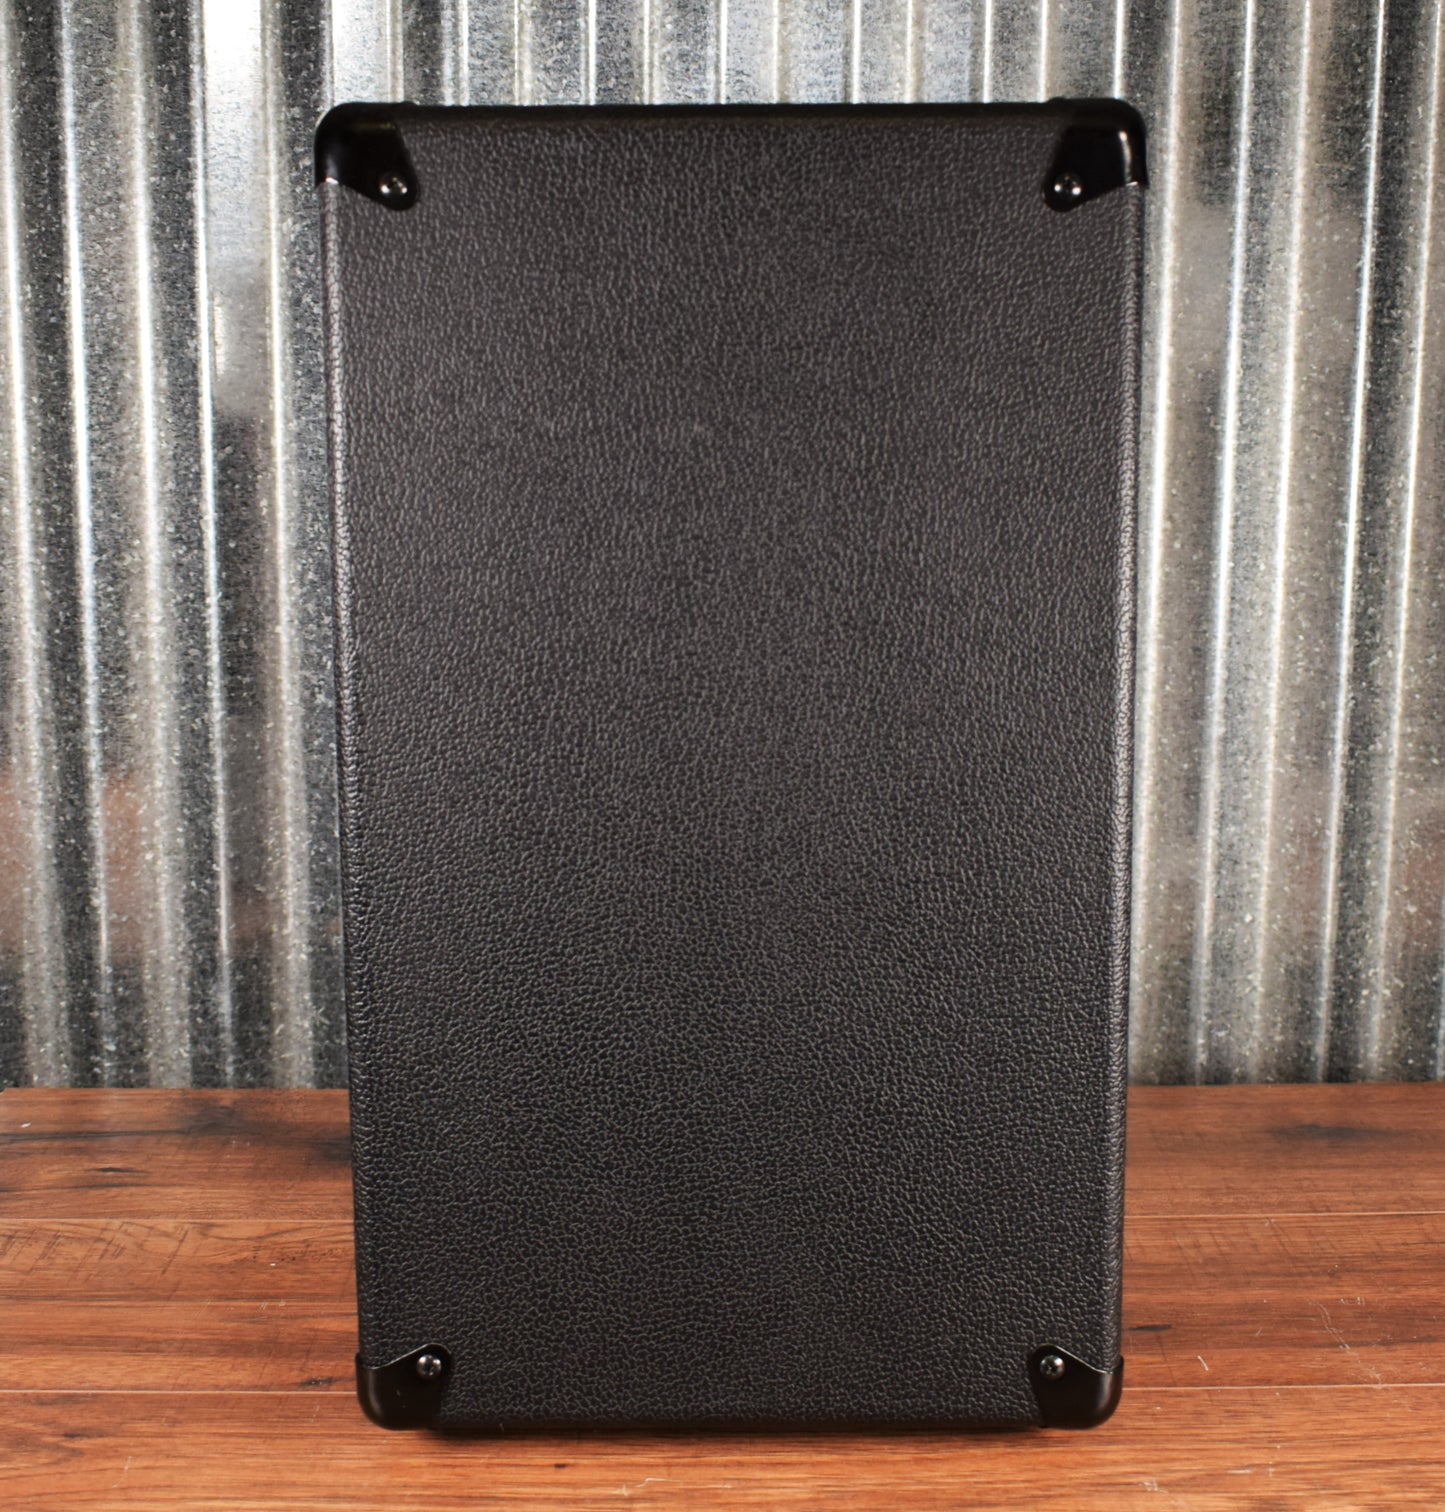 VHT Special 112C 12" Empty Open Back Guitar Amp Extension Speaker Cabinet Used